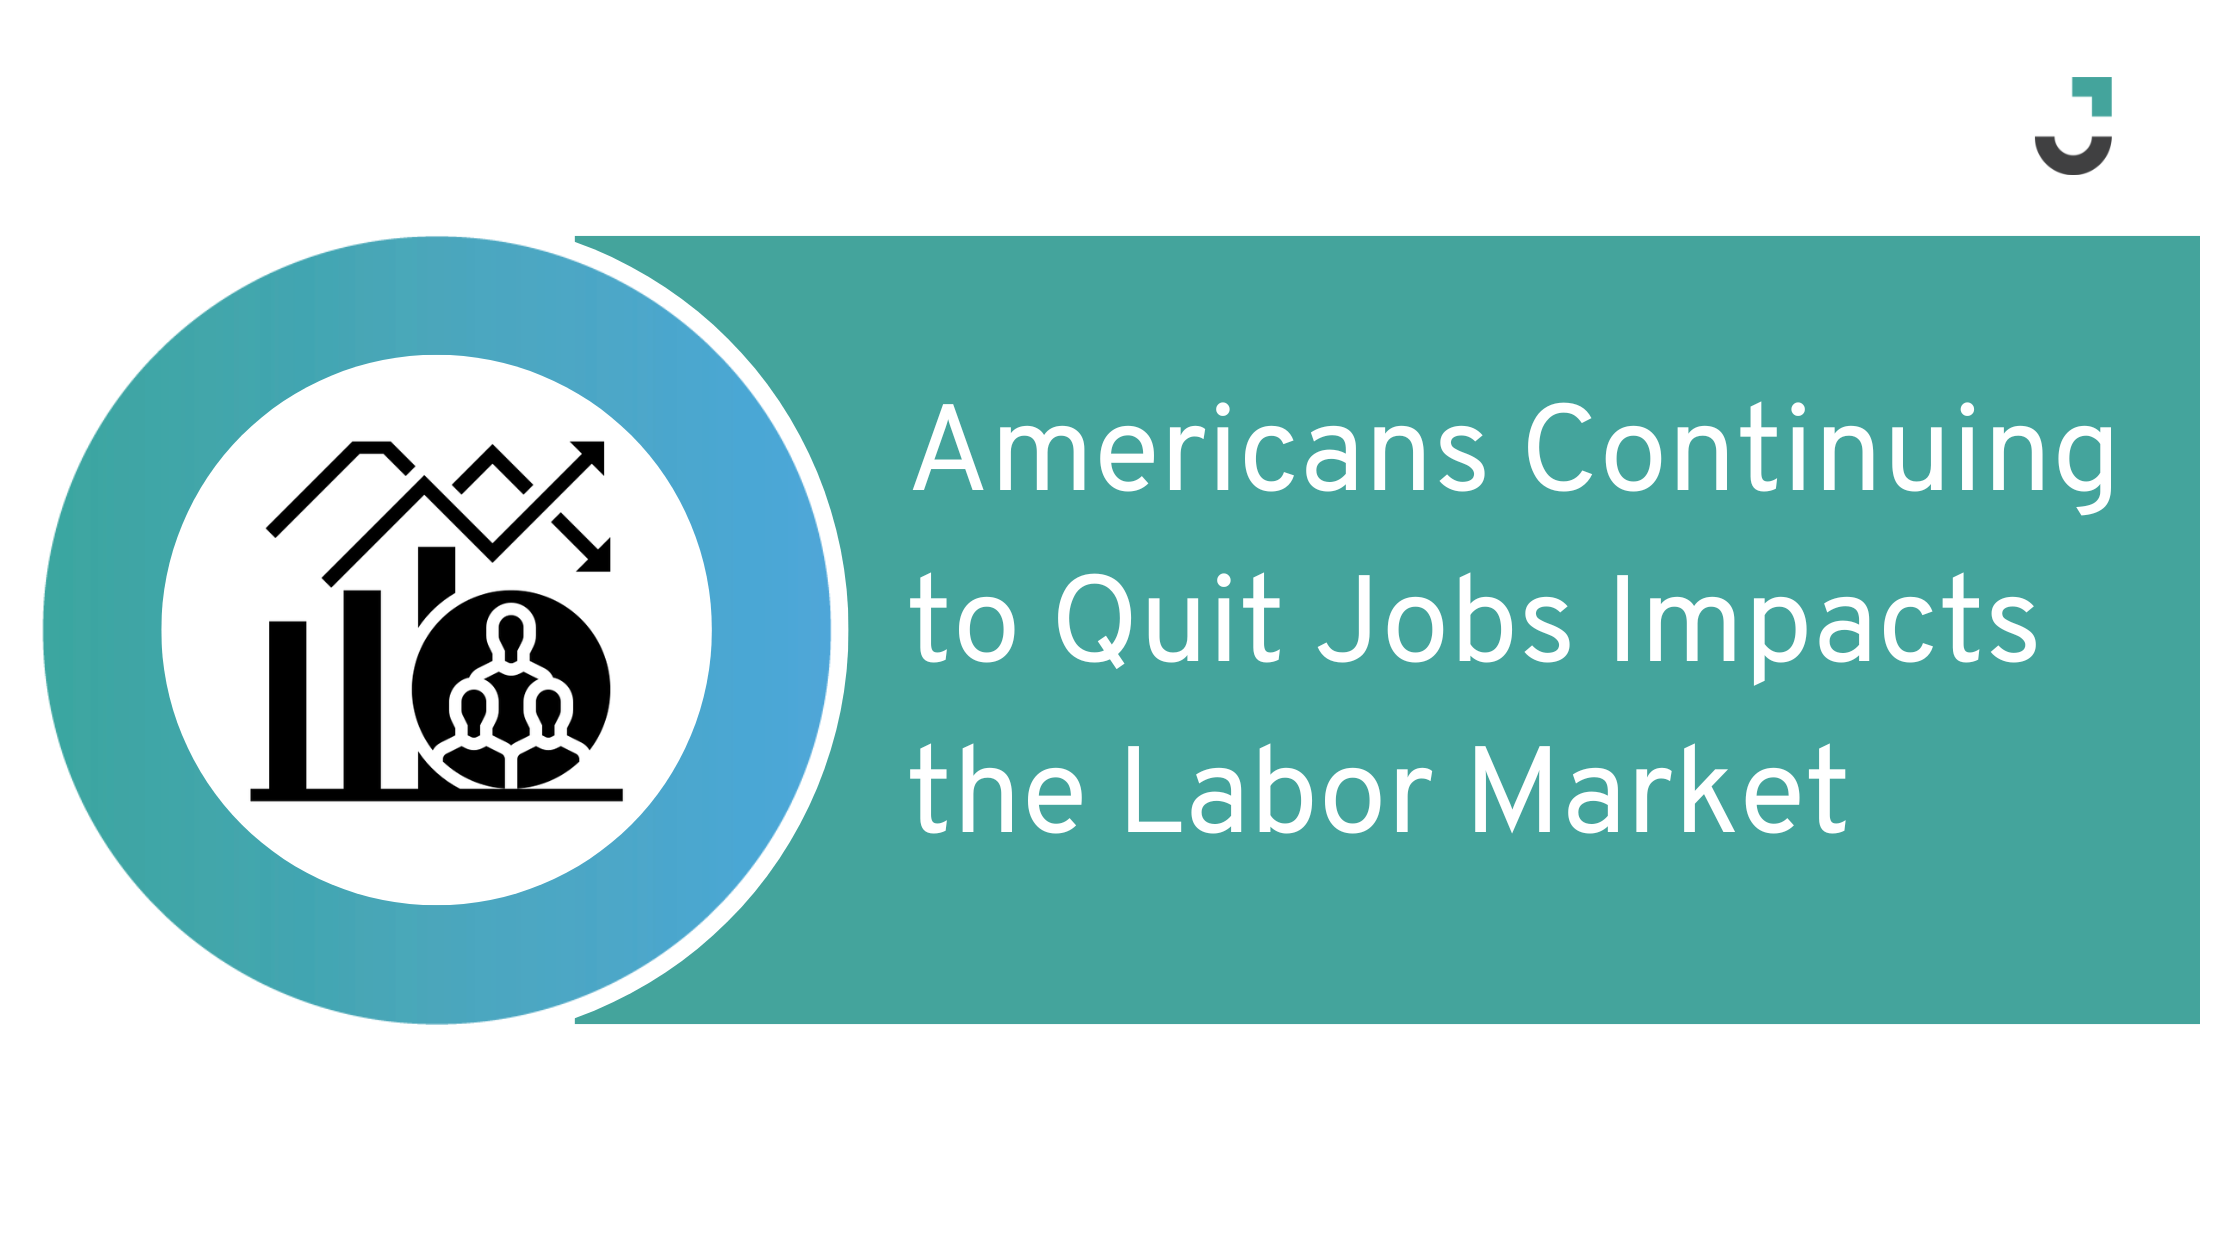 Americans Continuing to Quit Jobs Impacts the Labor Market